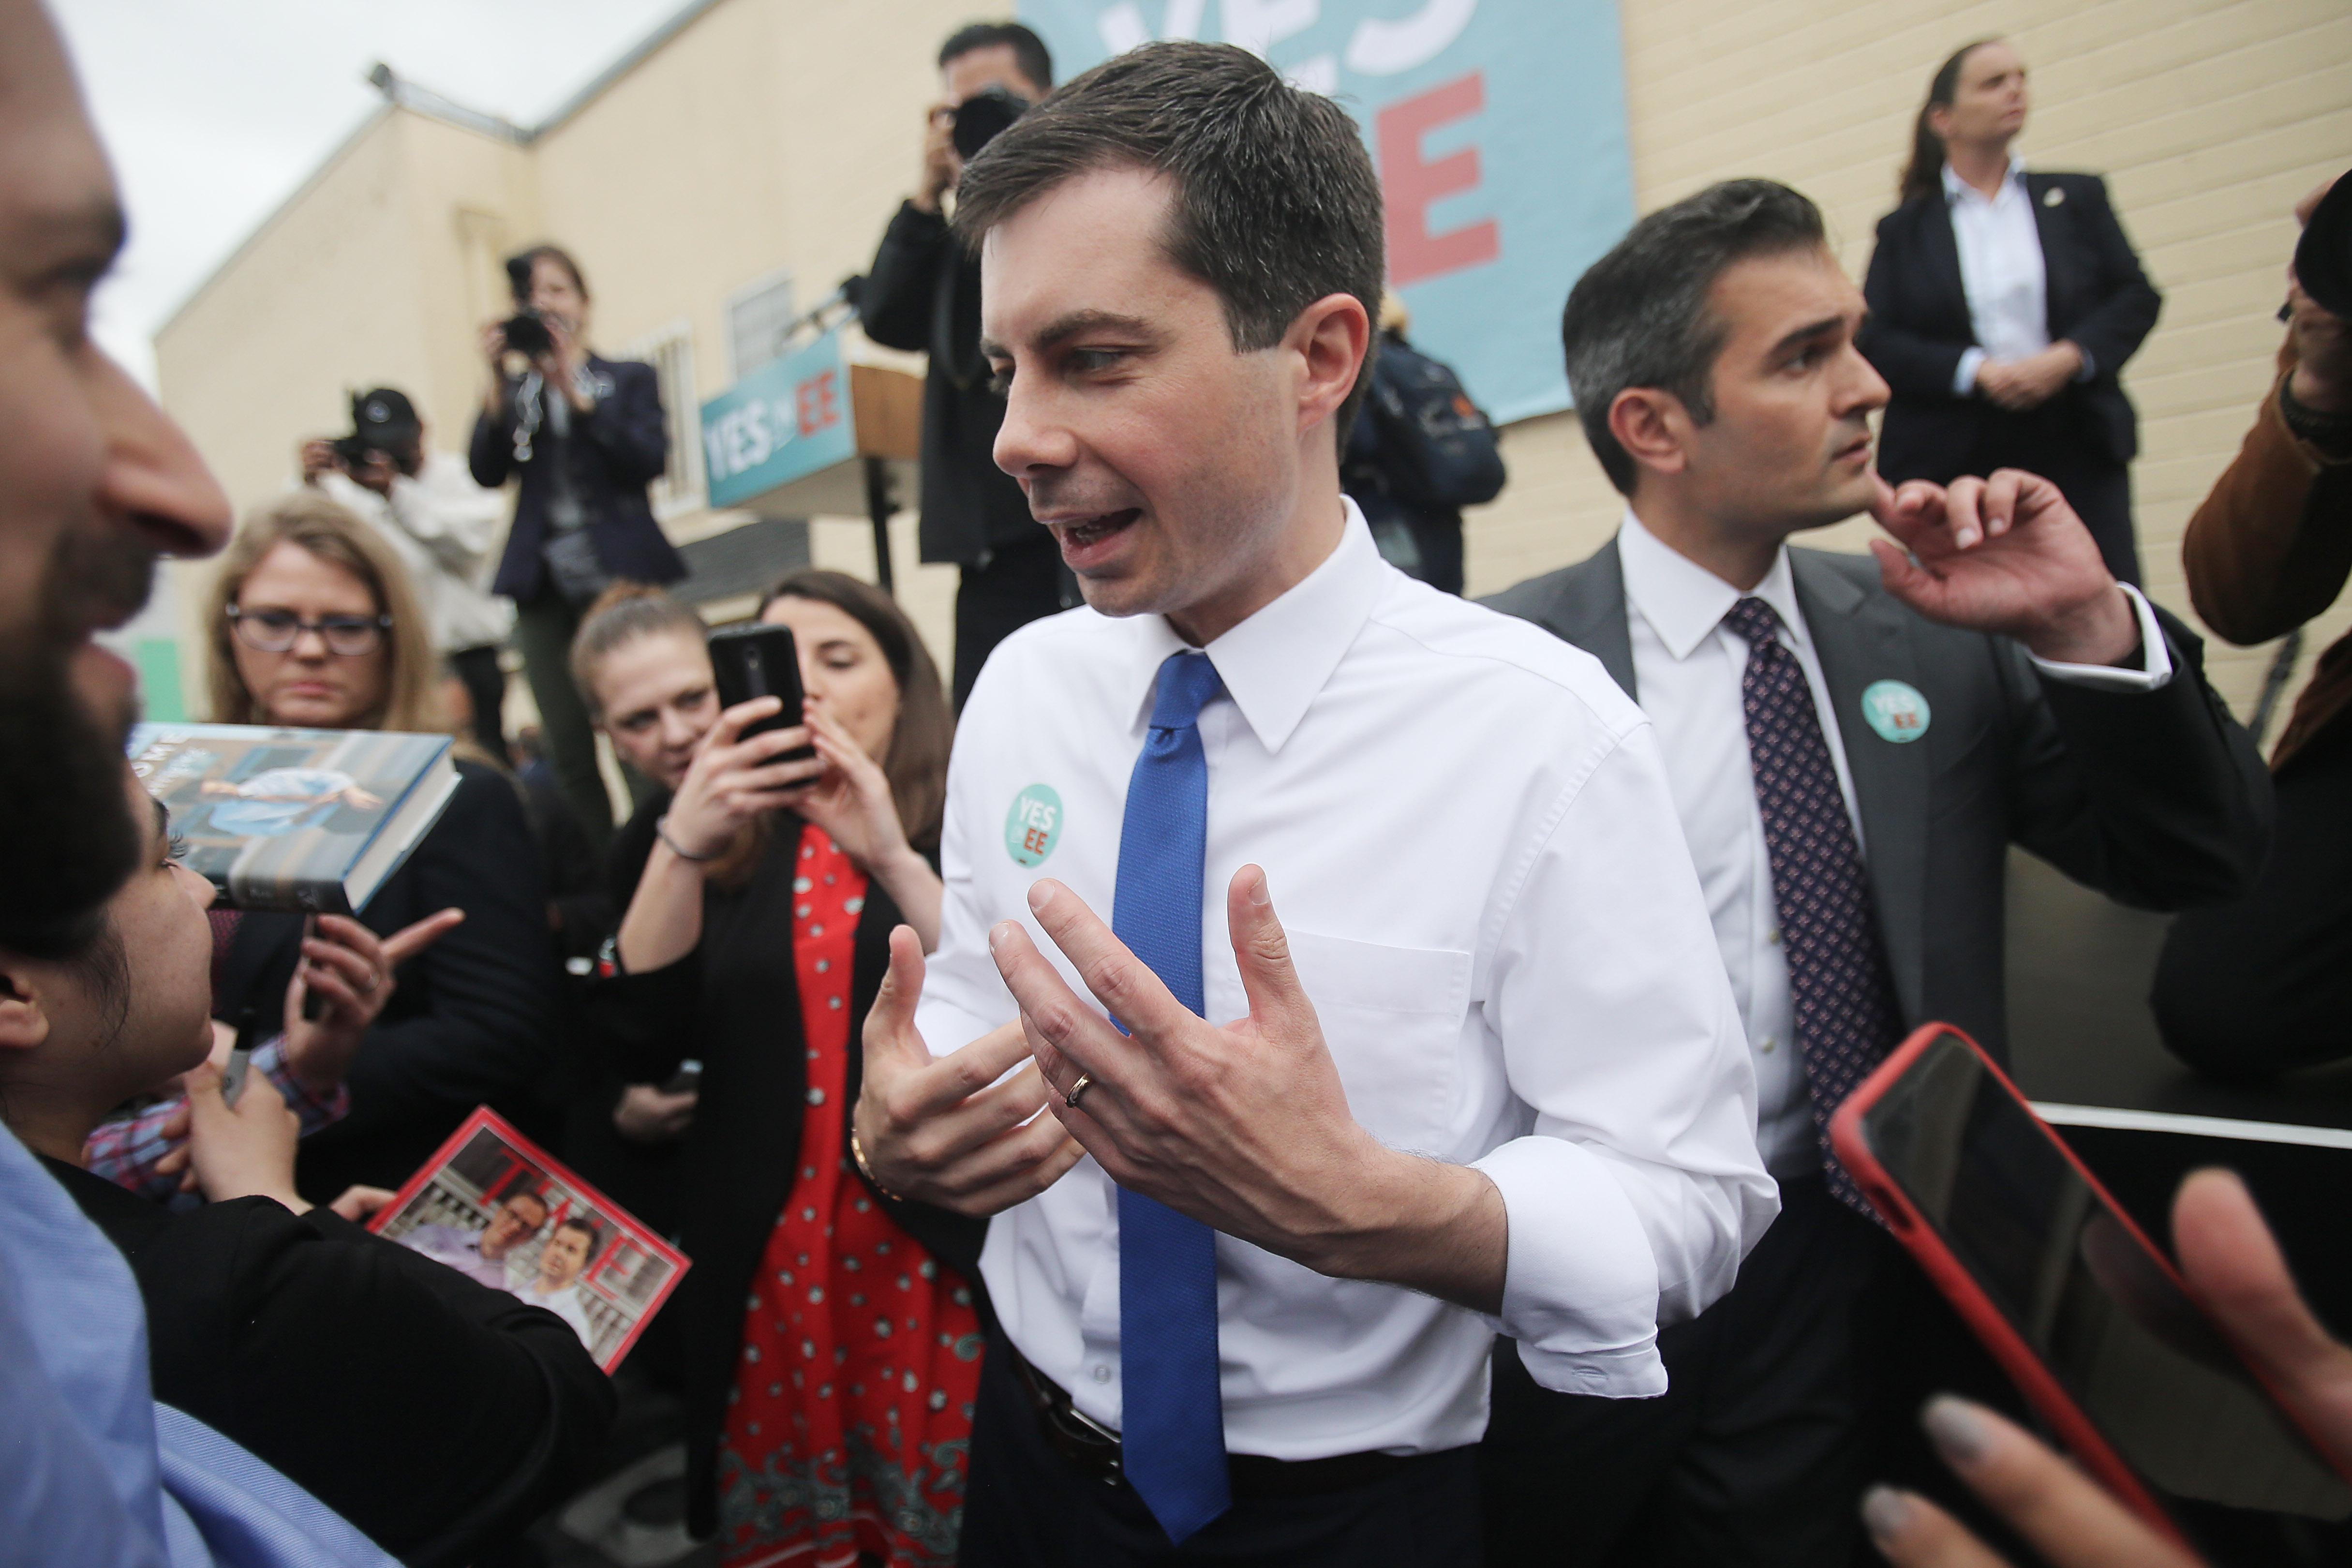 Pete Buttigieg greets supporters in Los Angeles on Thursday.